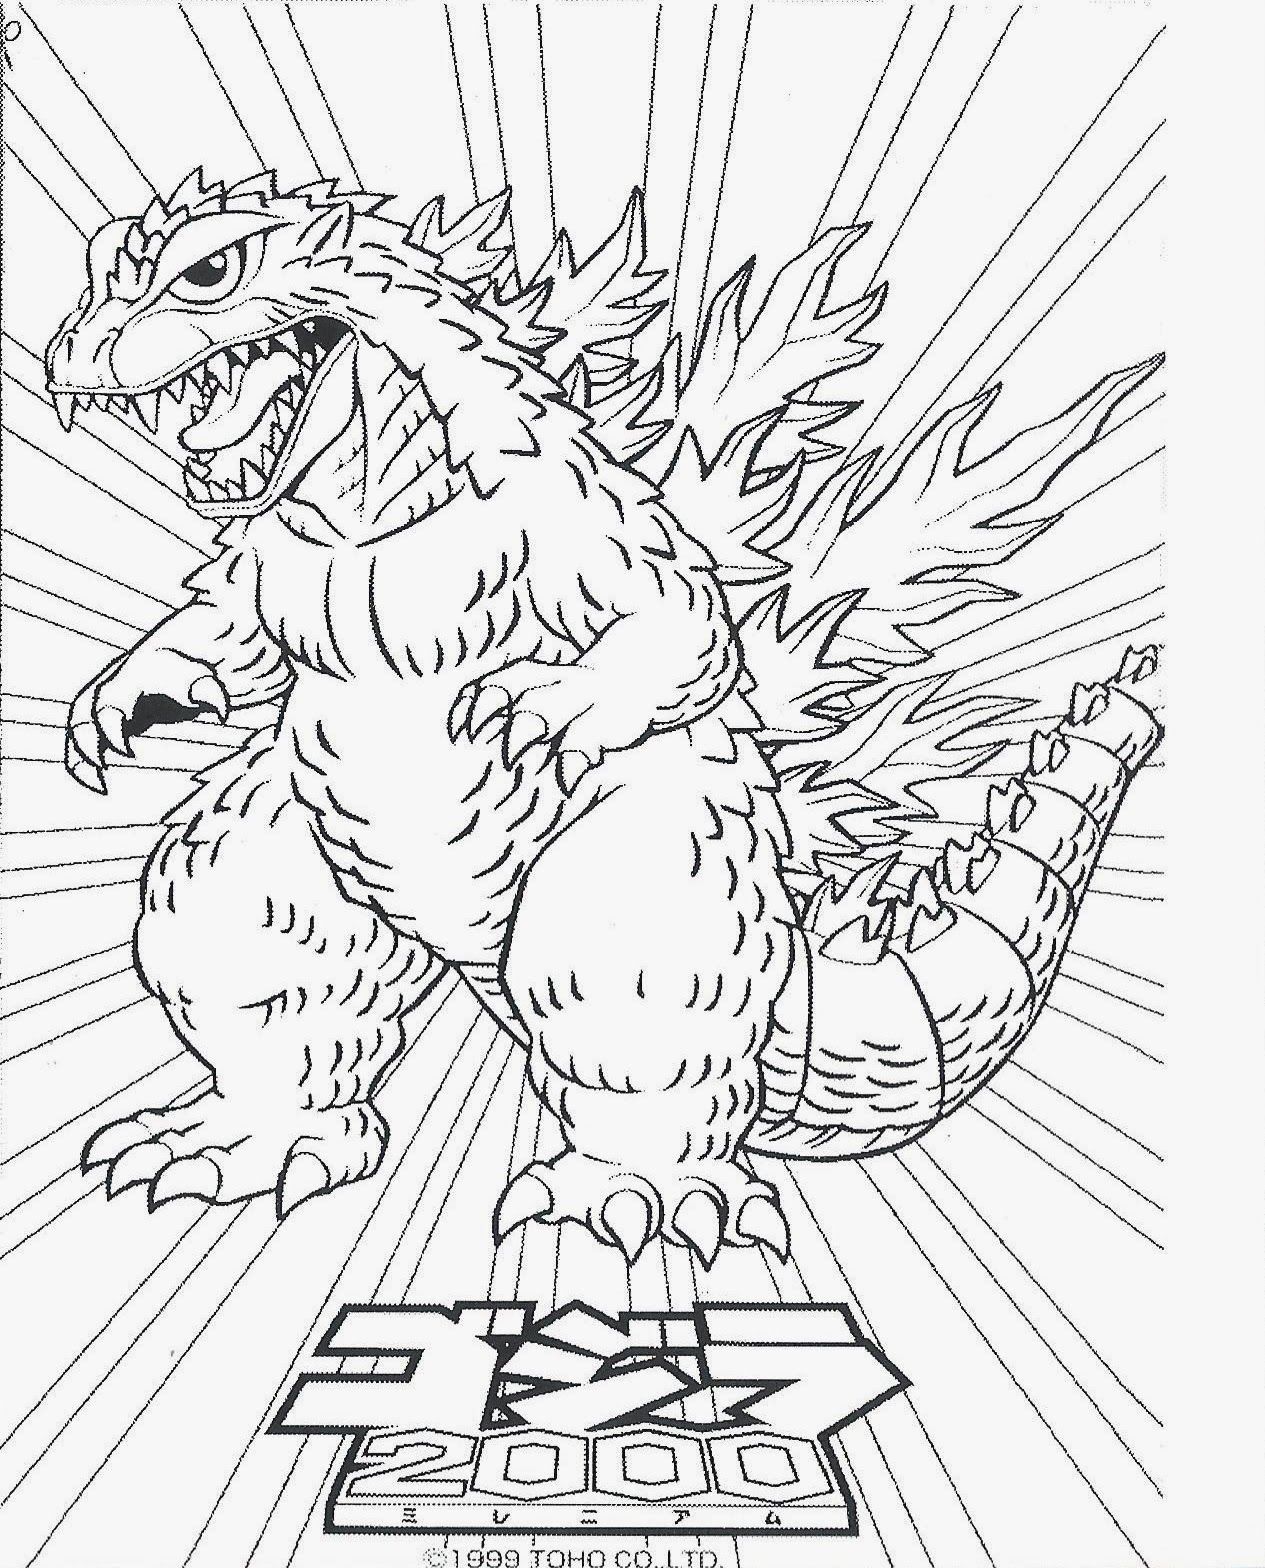 Free Printable Godzilla Coloring Pages, Download Free Printable